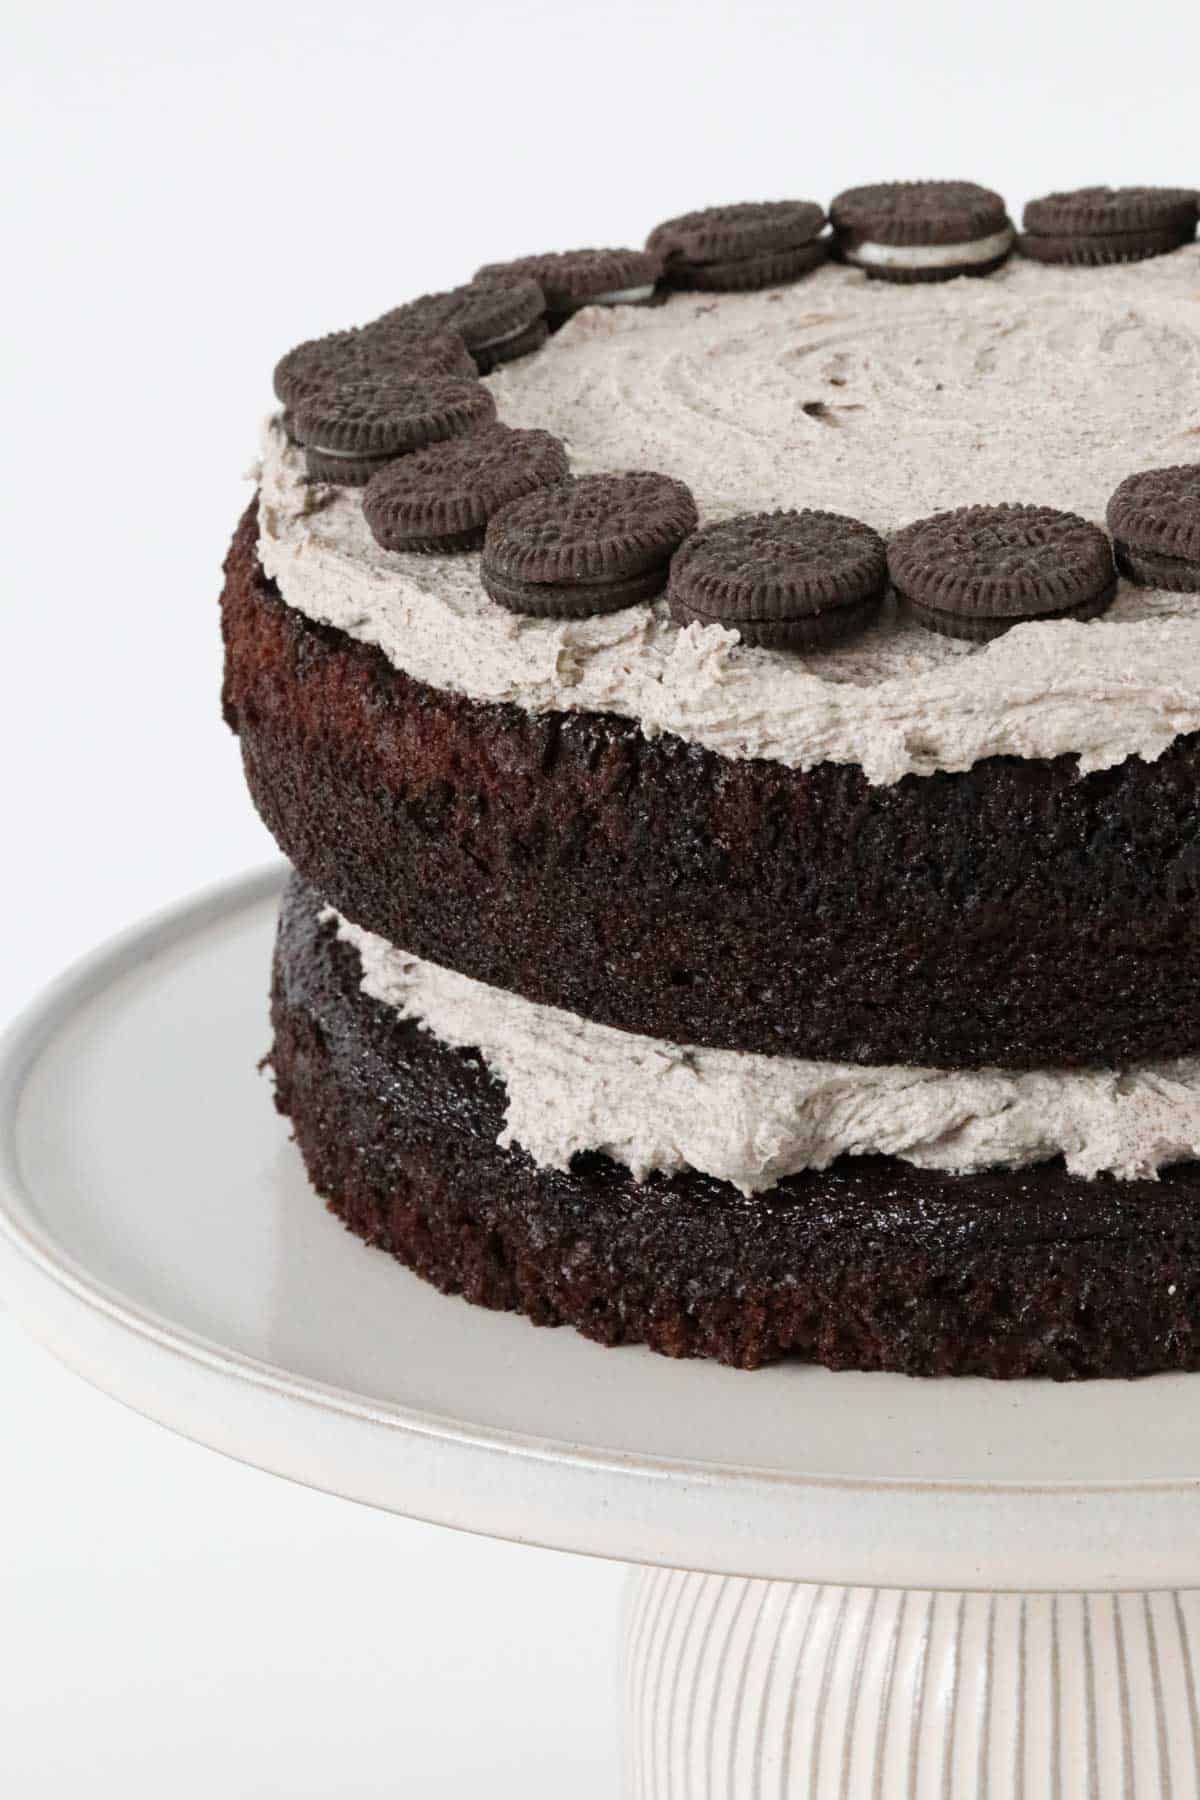 Side view of Oreo mud cake on a cake stand.